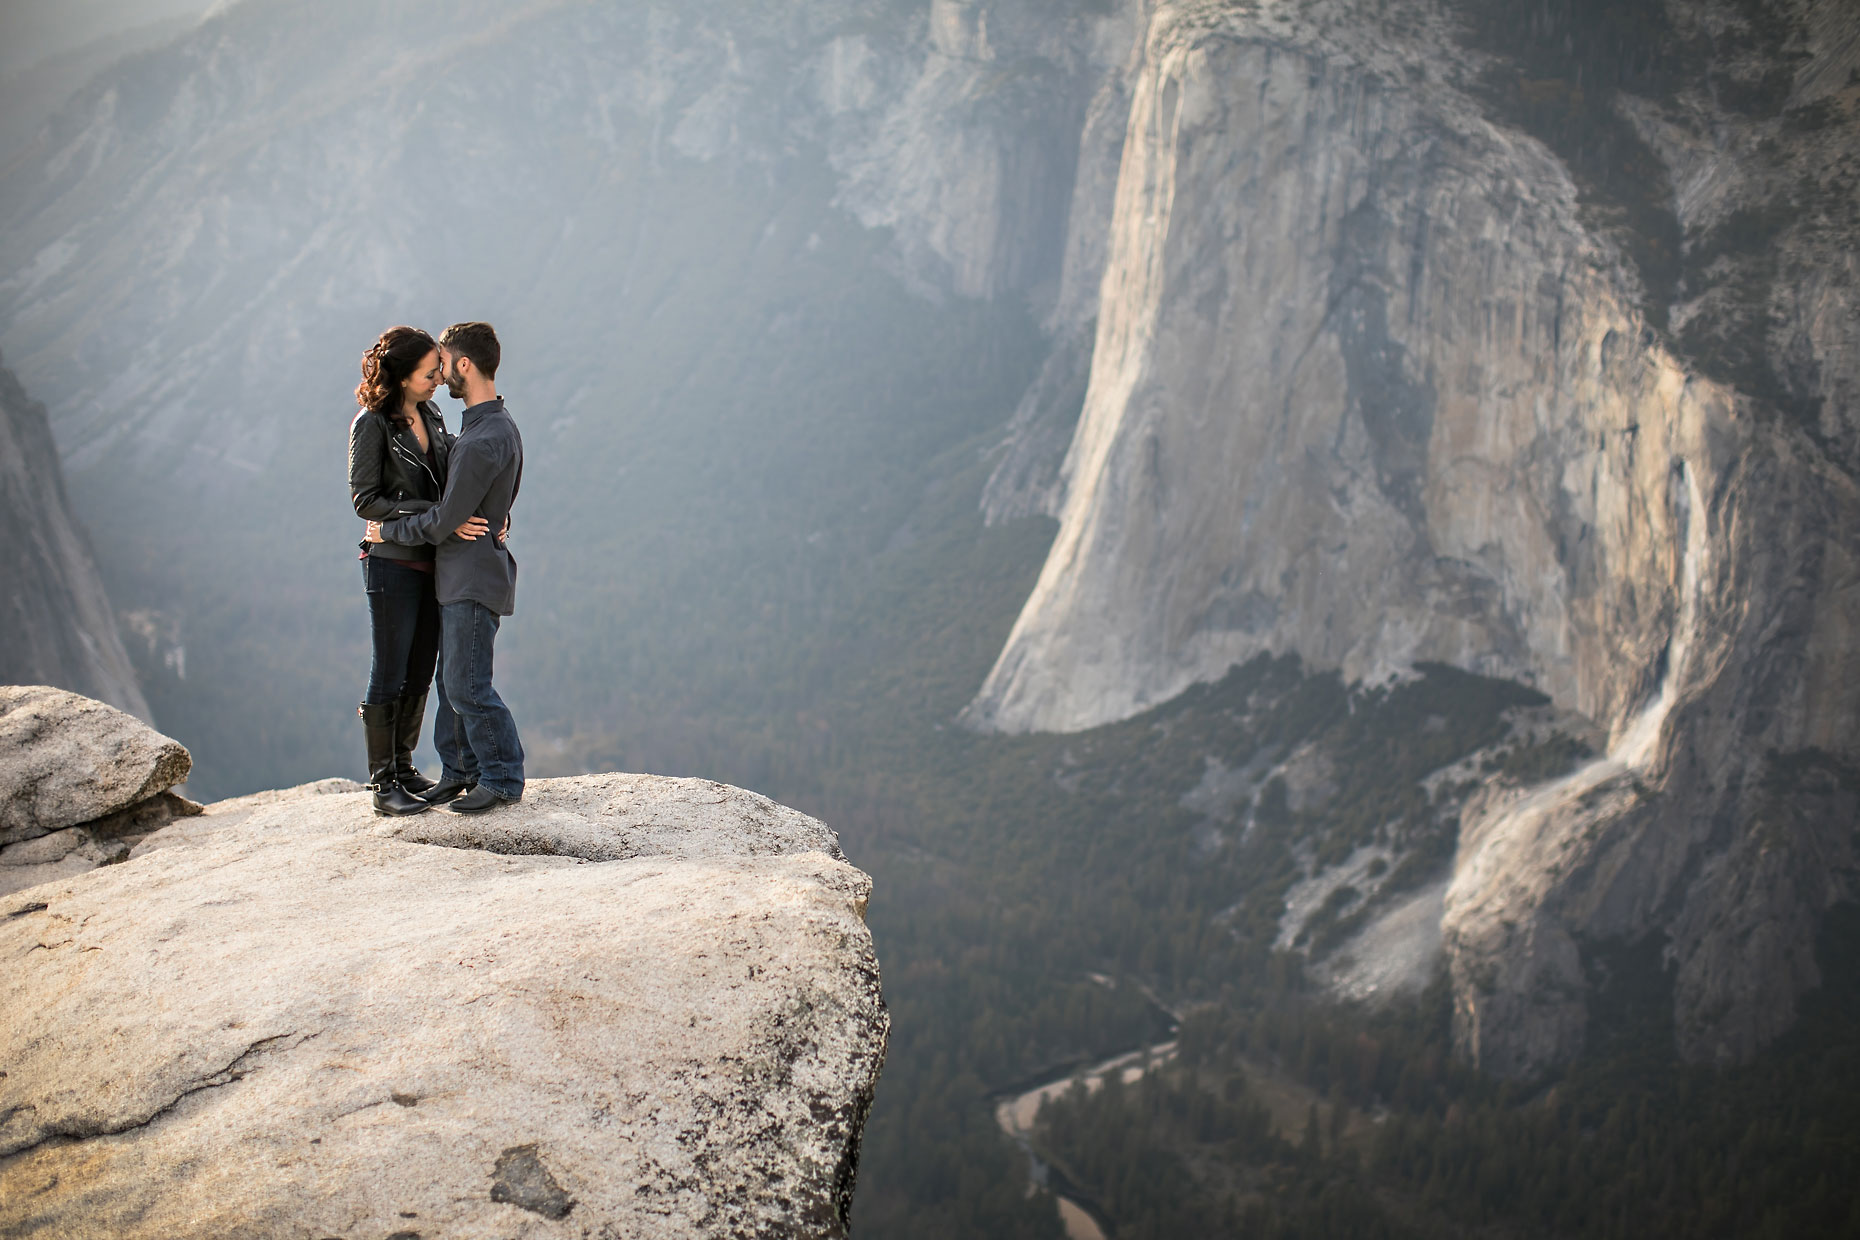 Taft Point adventure photography session in Yosemite.